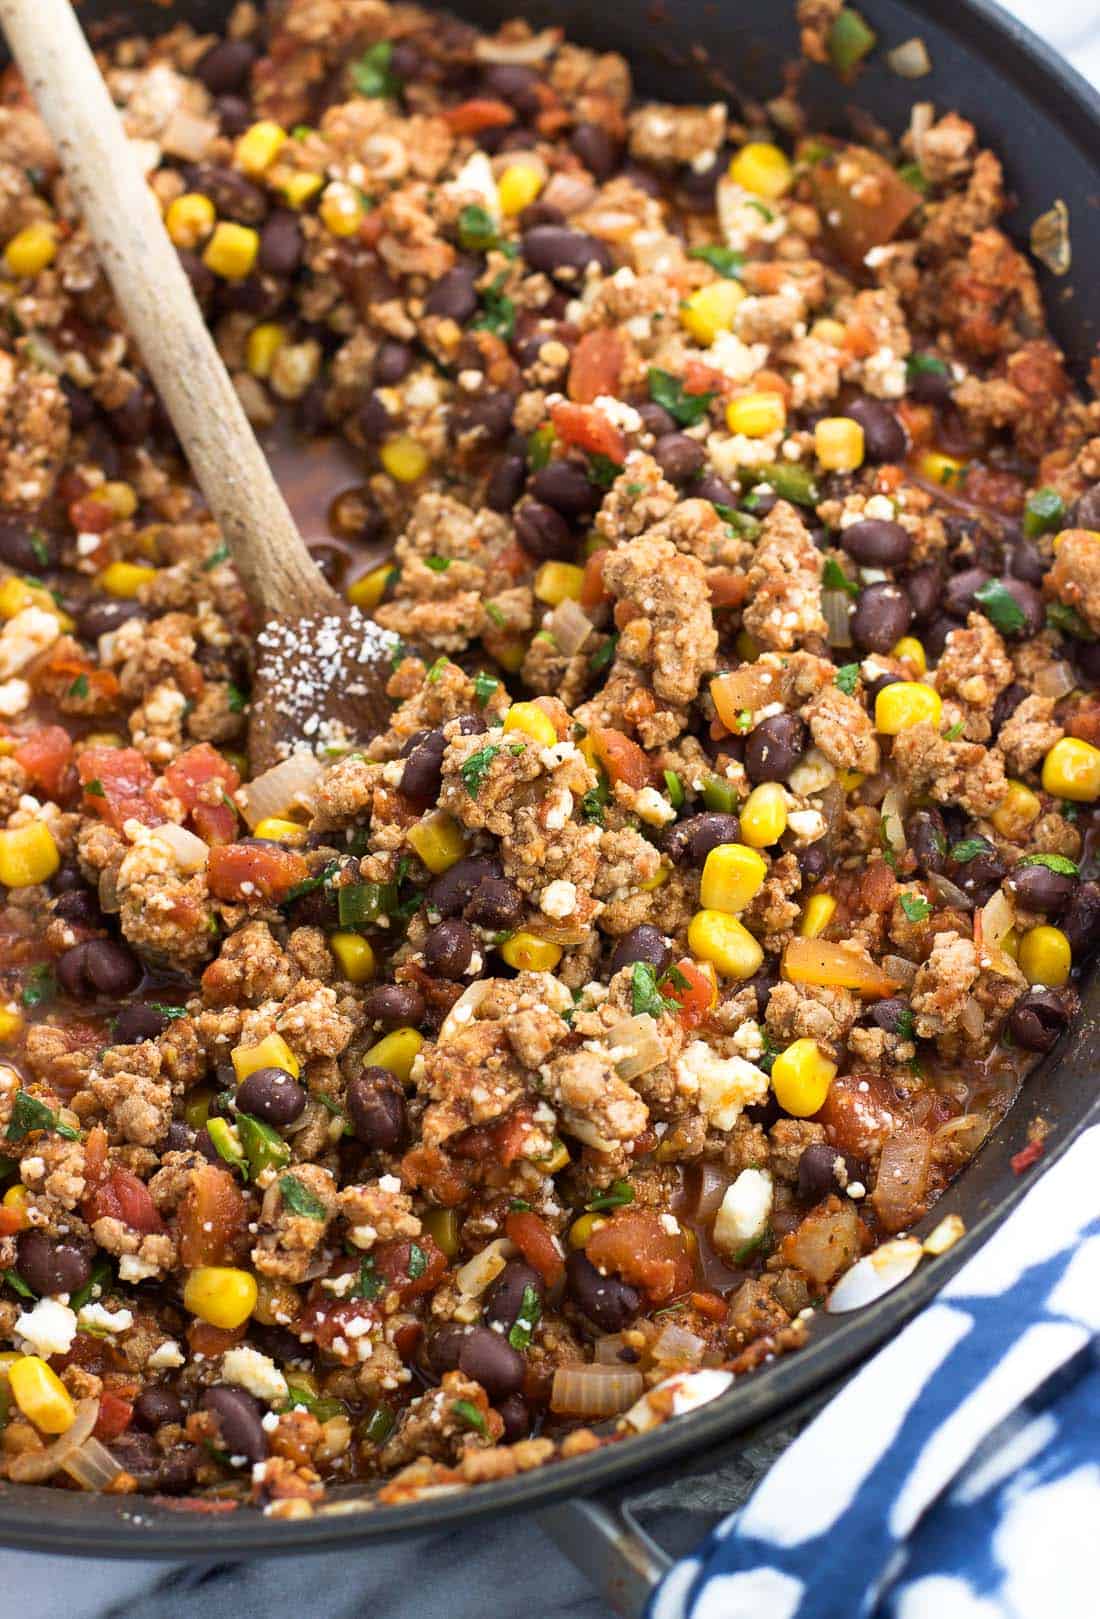 Turkey, black beans, corn, salsa, cilantro, and cotija cheese stirred together in a pan with a wooden spoon.